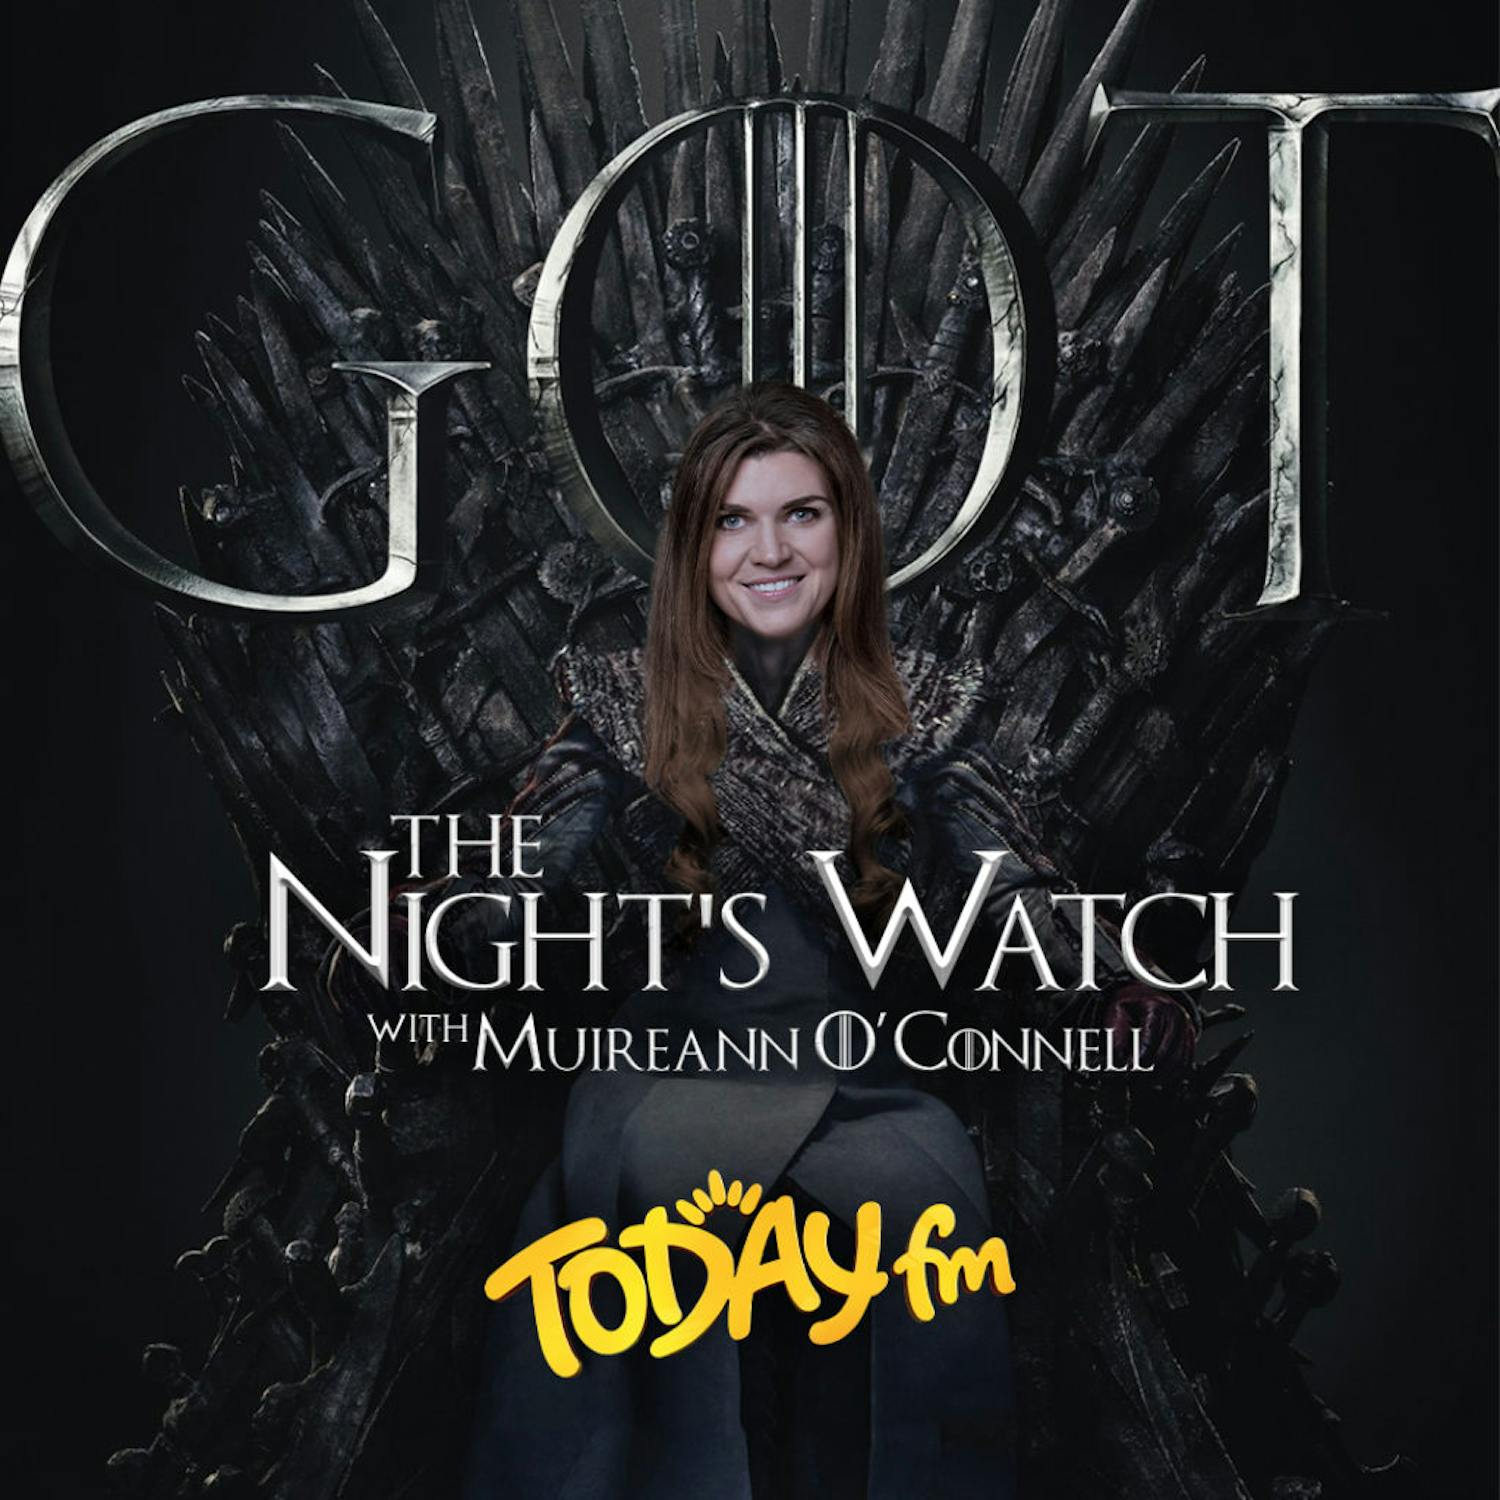 The Final Episode Of 'The Nights Watch With Muireann O'Connell'